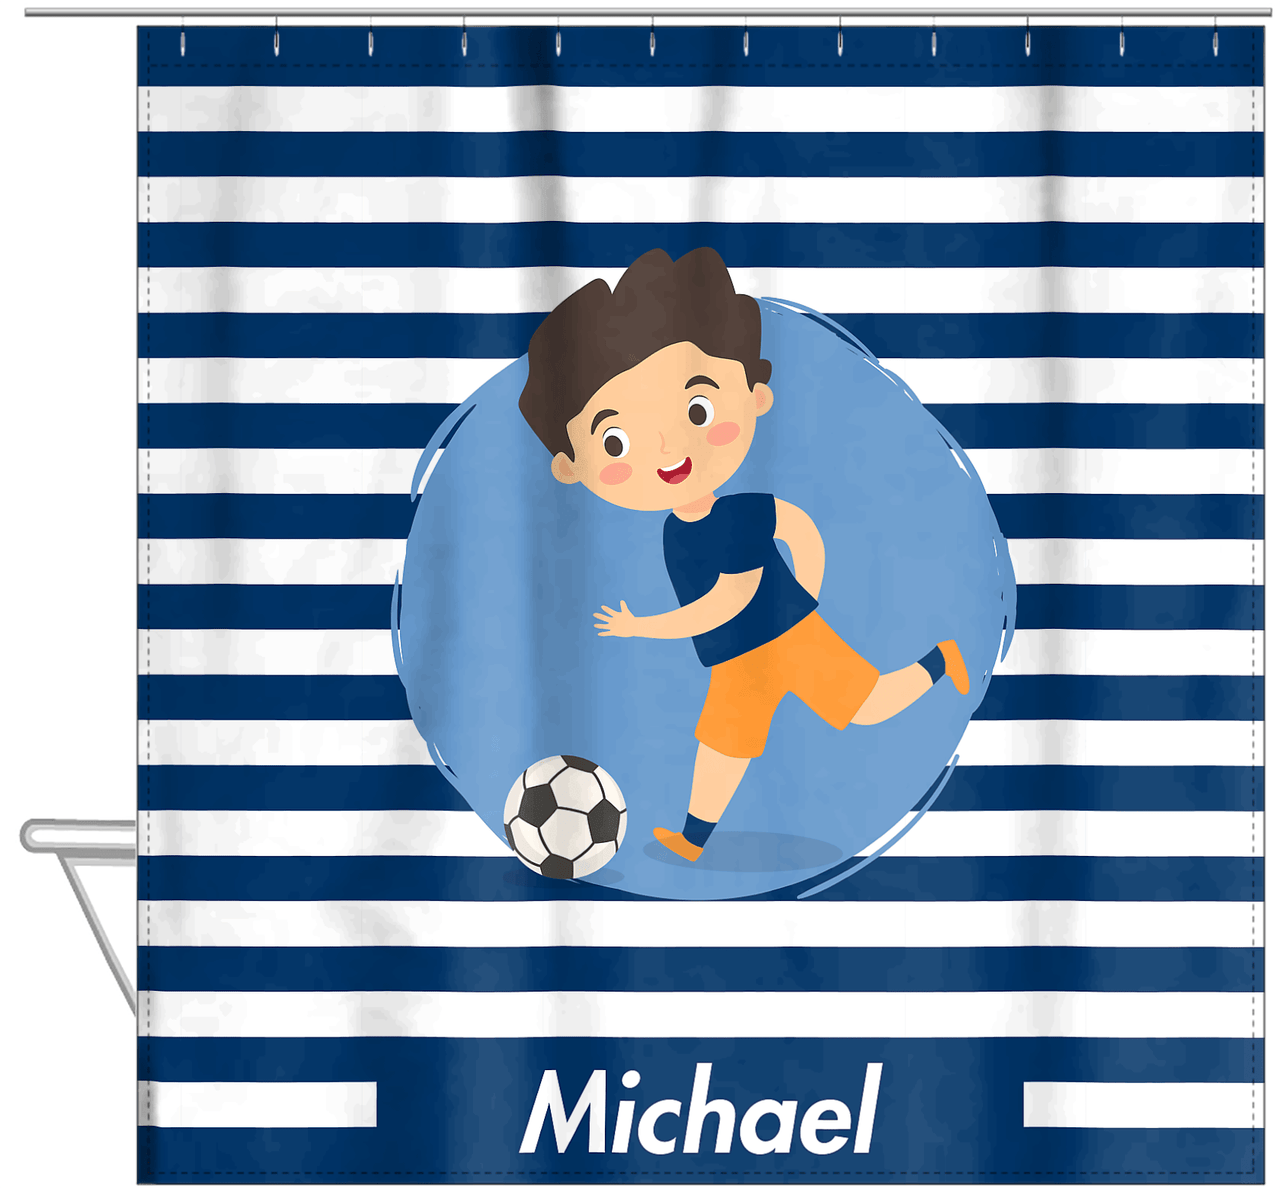 Personalized Soccer Shower Curtain XXIV - Blue Background - Black Hair Boy - Hanging View